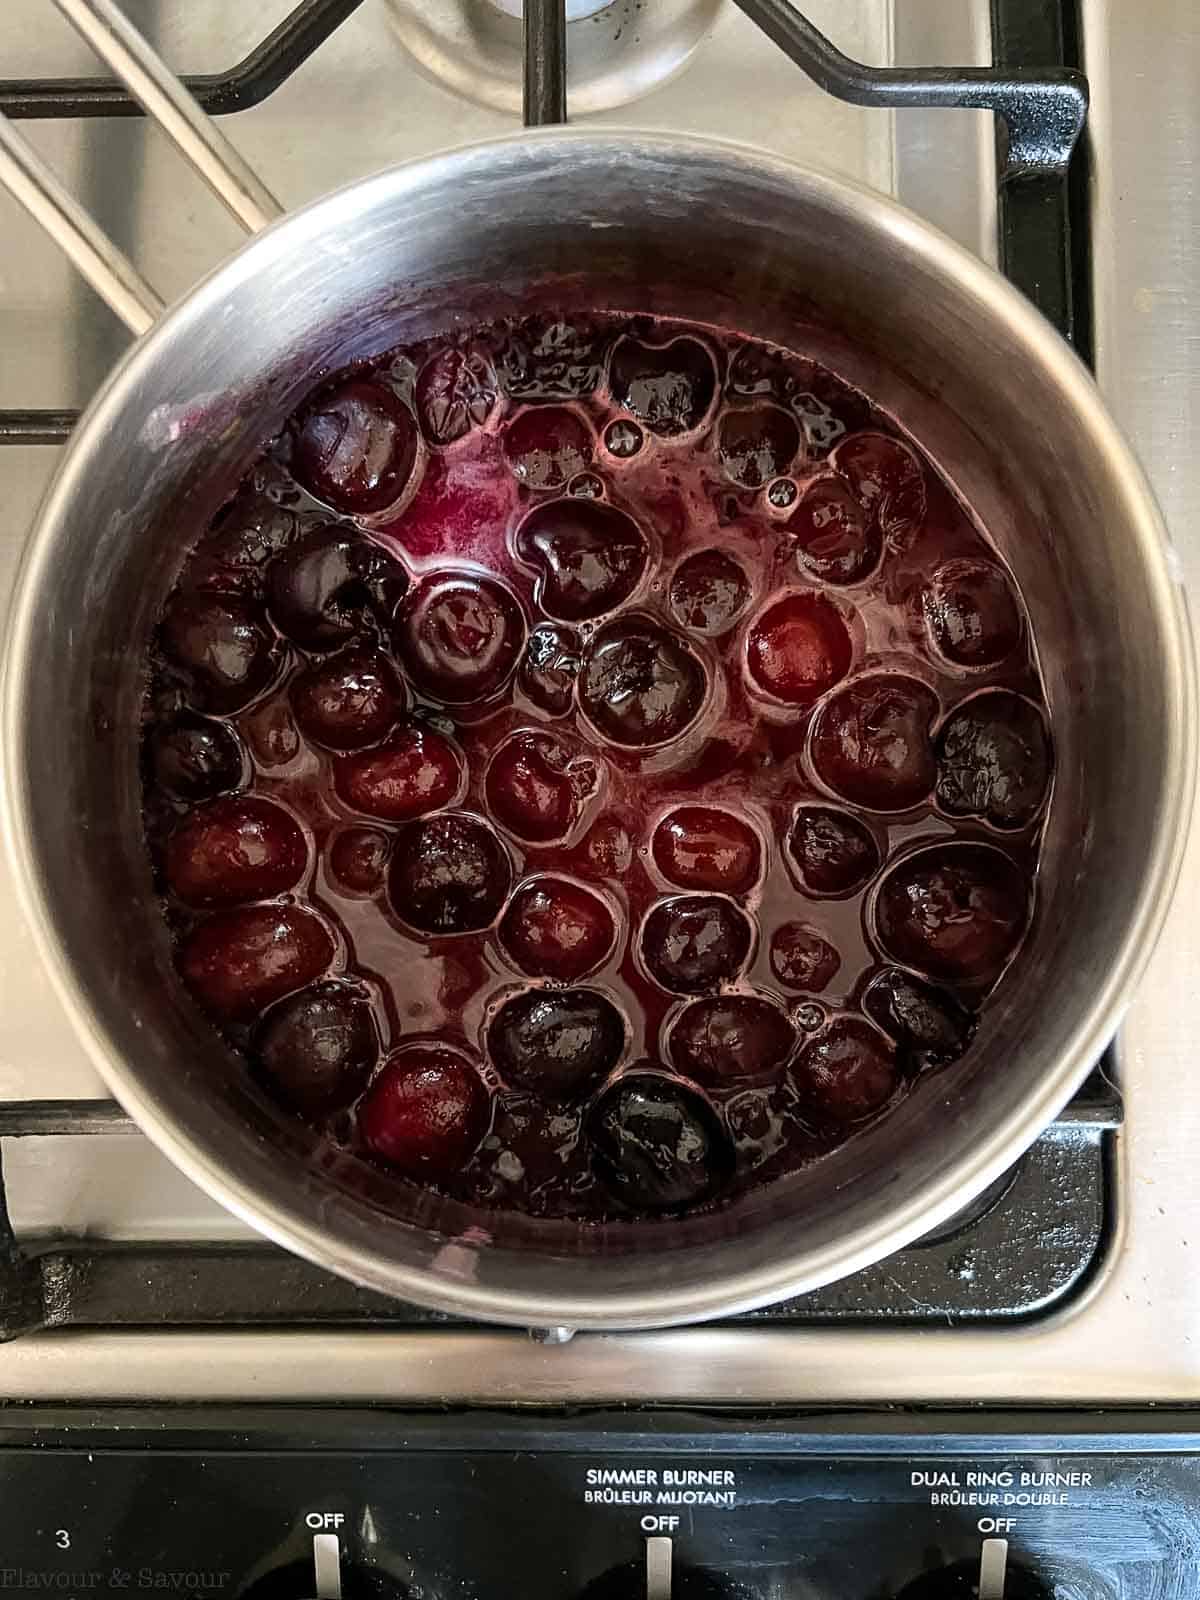 Cherry pie filling in a saucepan on the stove.